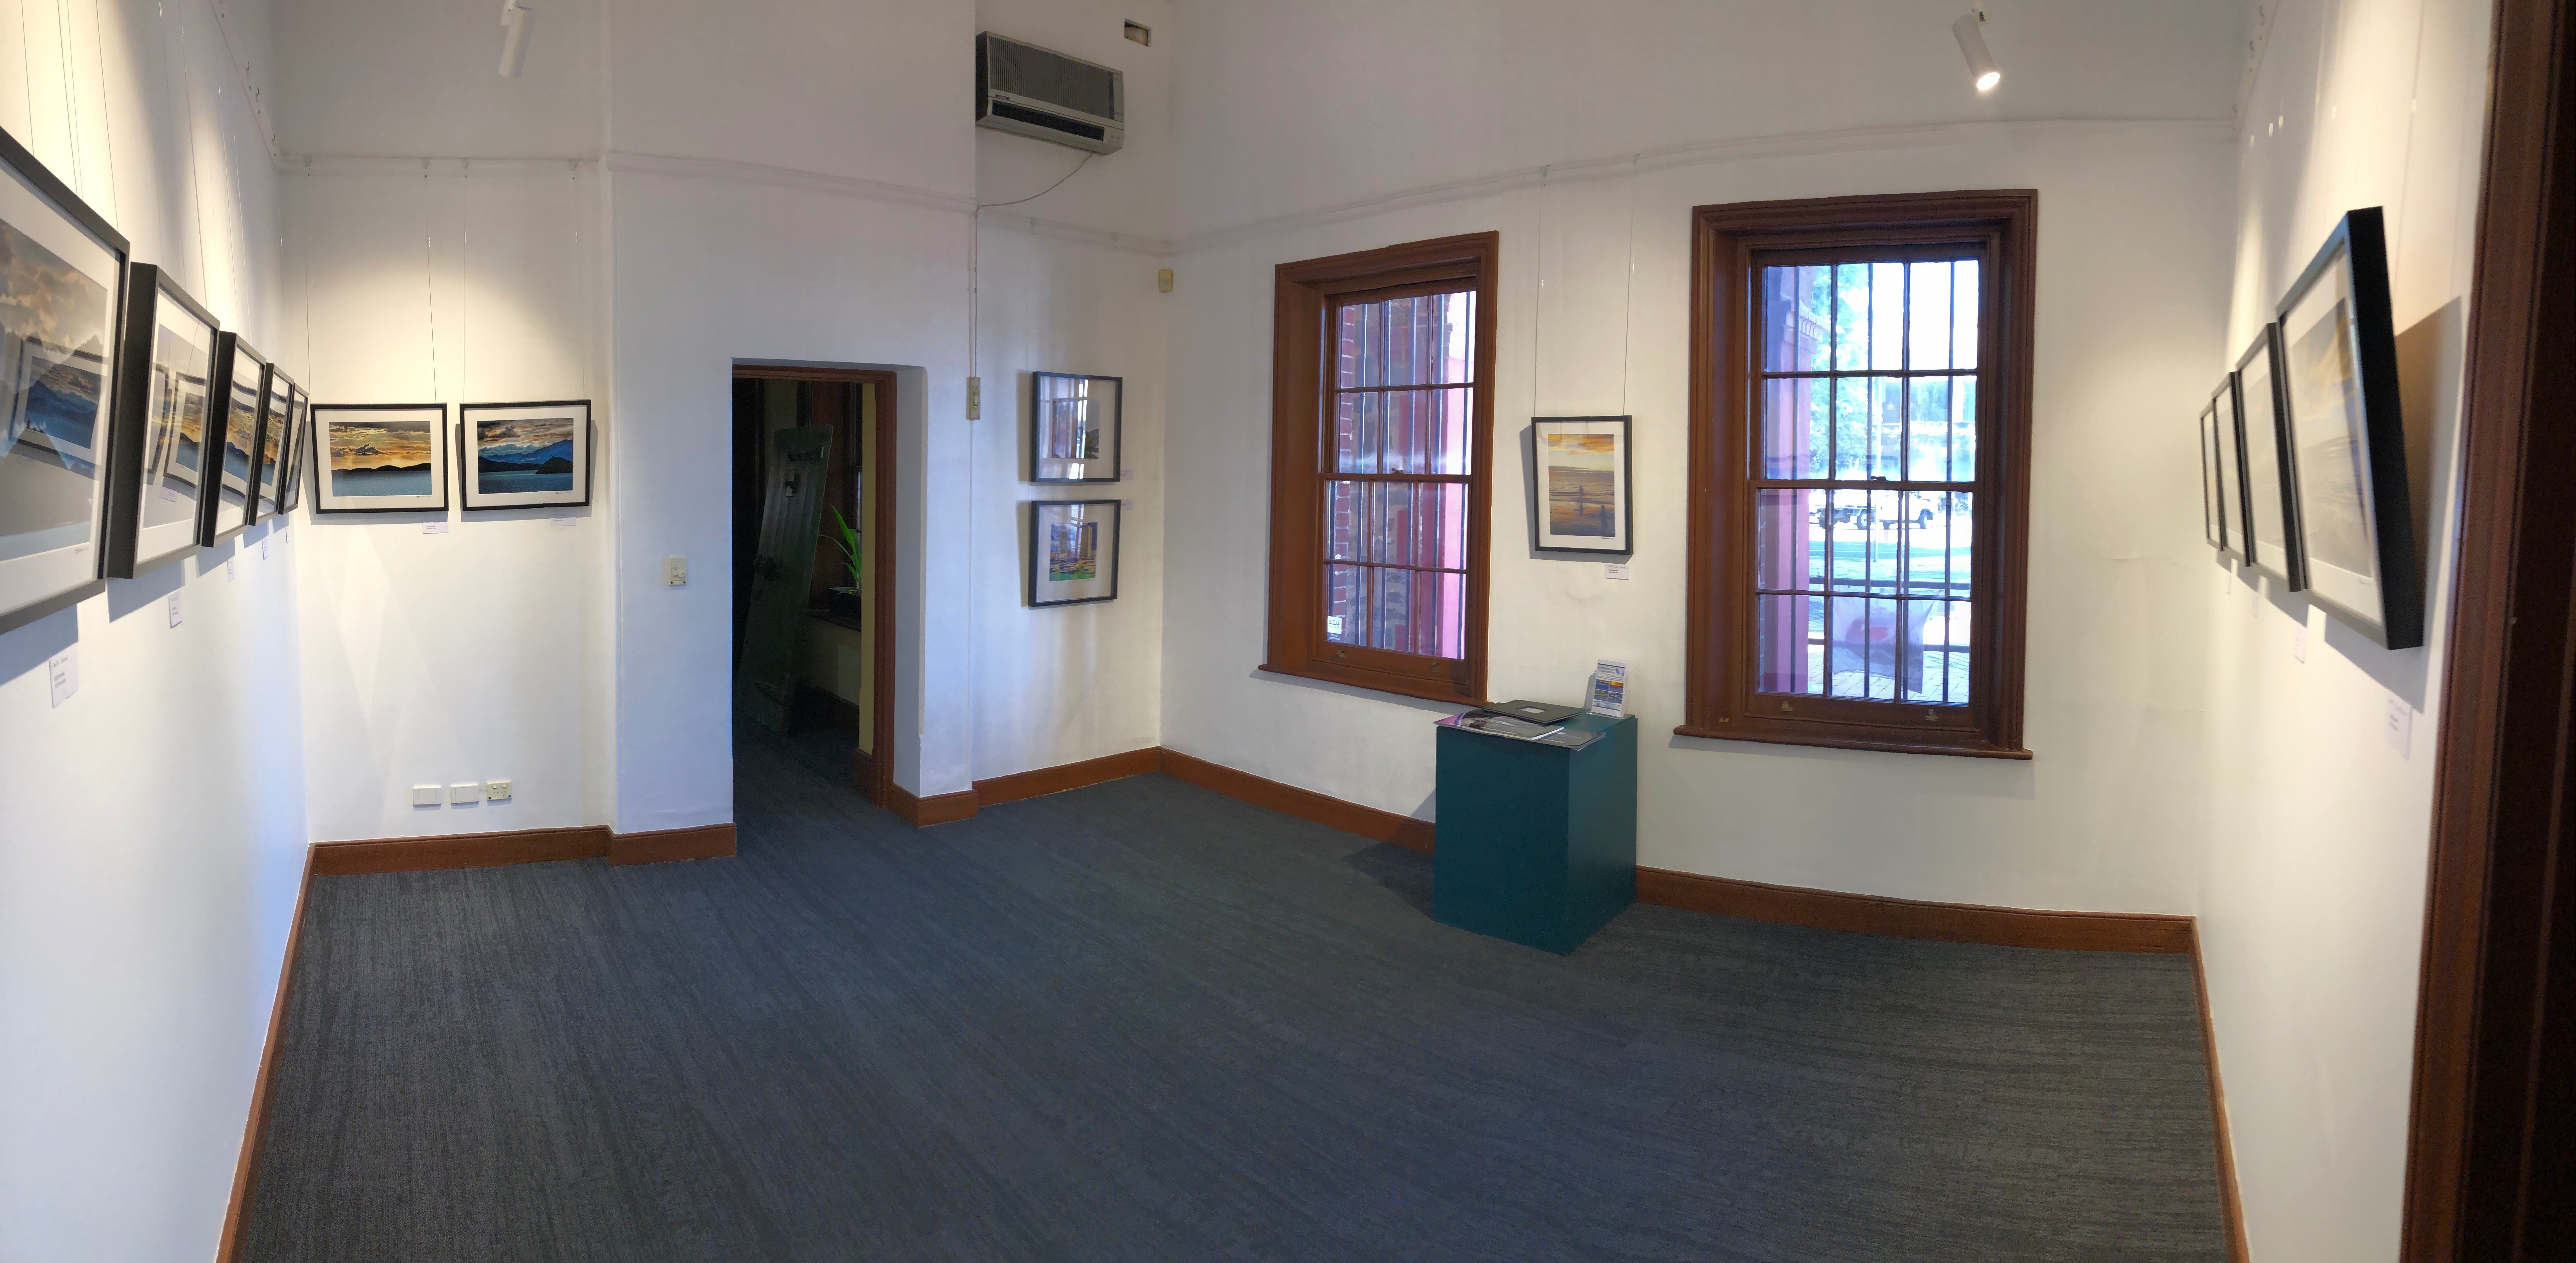 Port Adelaide Visitor Information Centre Gallery - thumb 0